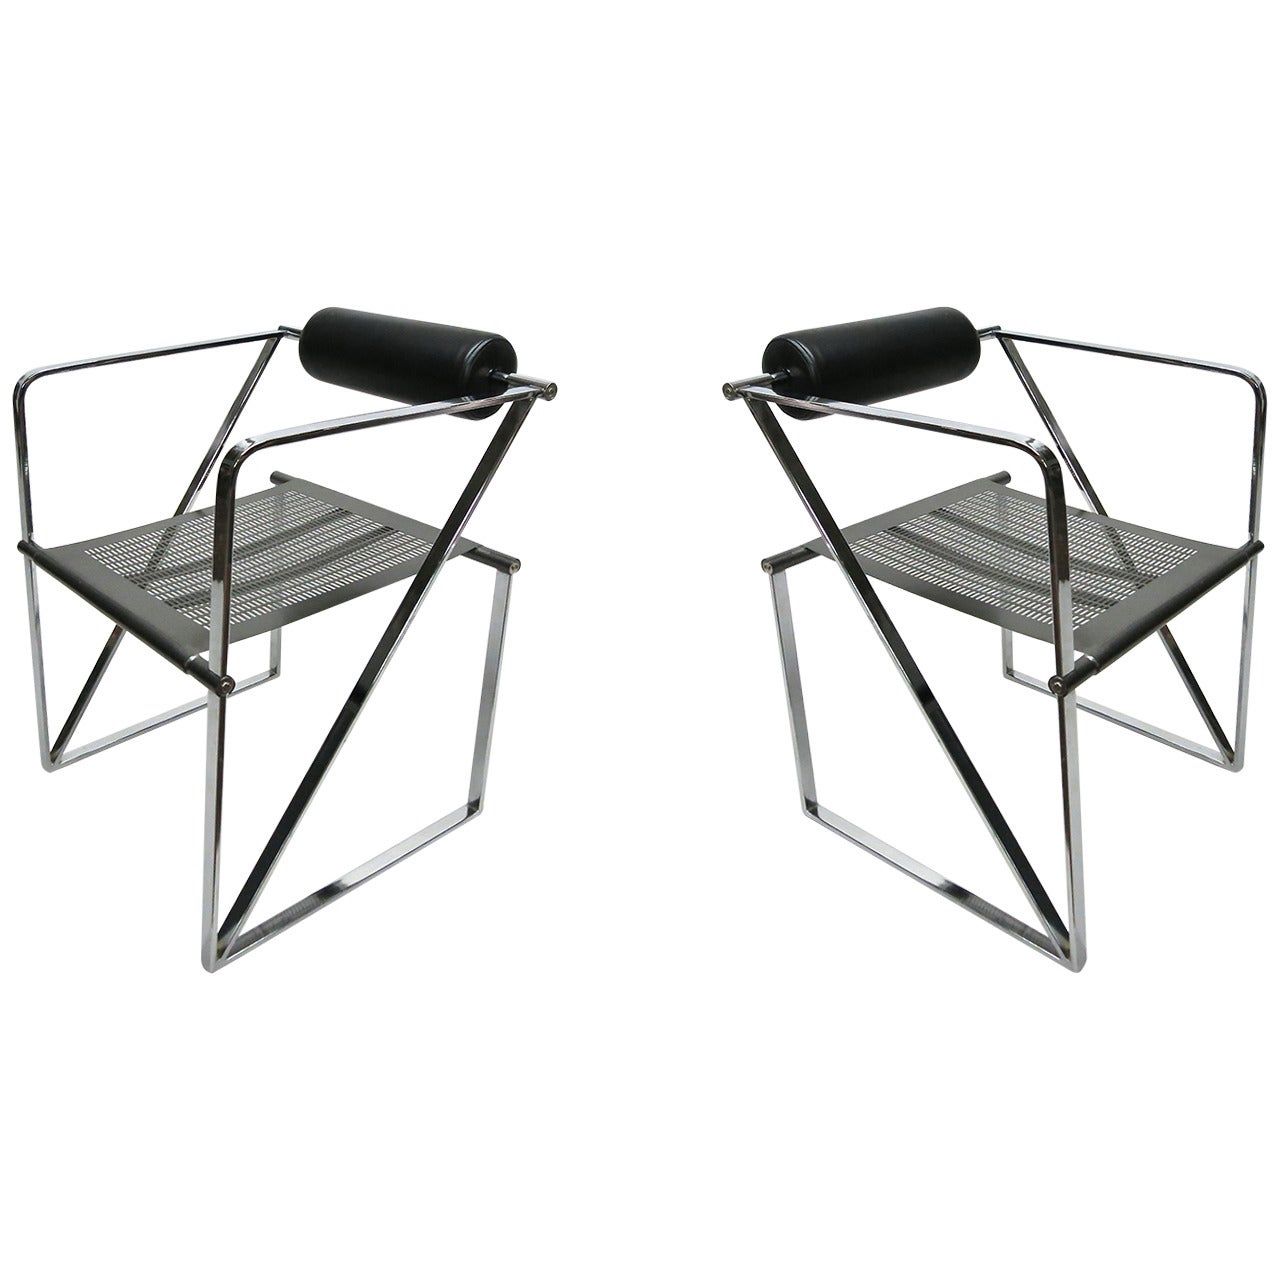 Pair of Chairs by Mario Botta, Steel and Leather, circa 1980, Made in Italy